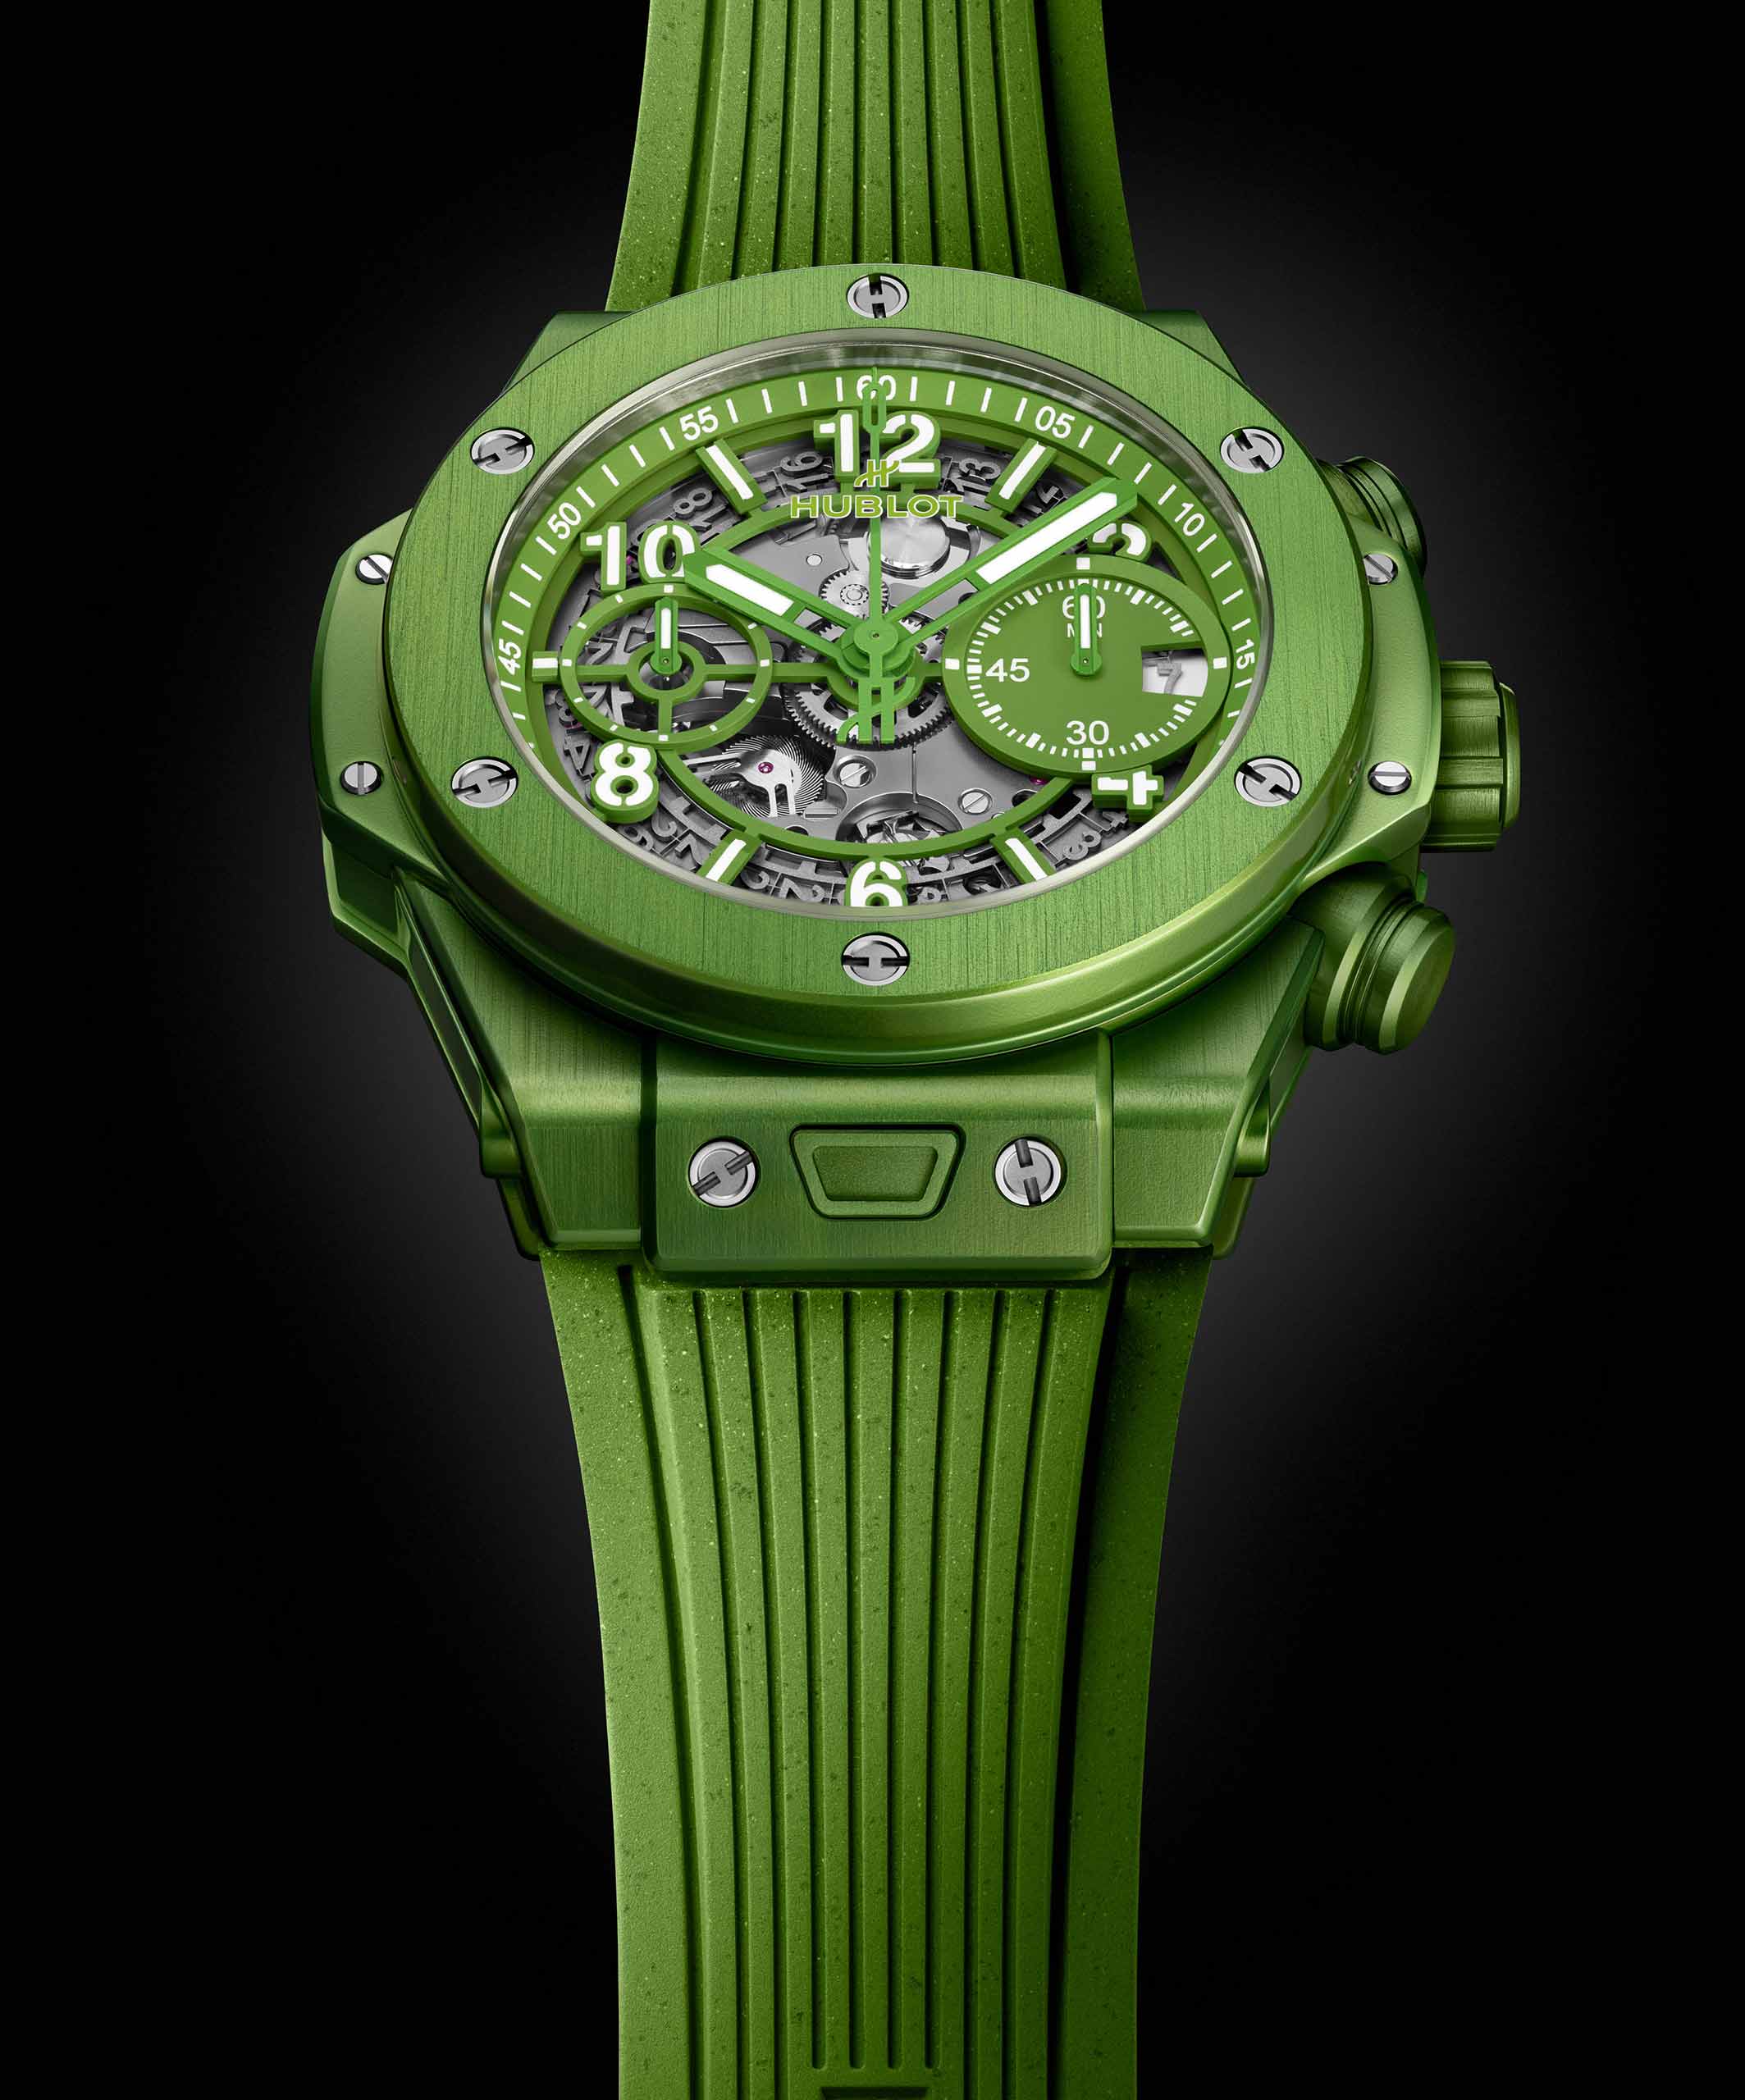 A Different Kind of Coffee Watch: Hublot and Nespresso Team Up for a Big Bang Unico that is All About Recycled Materials